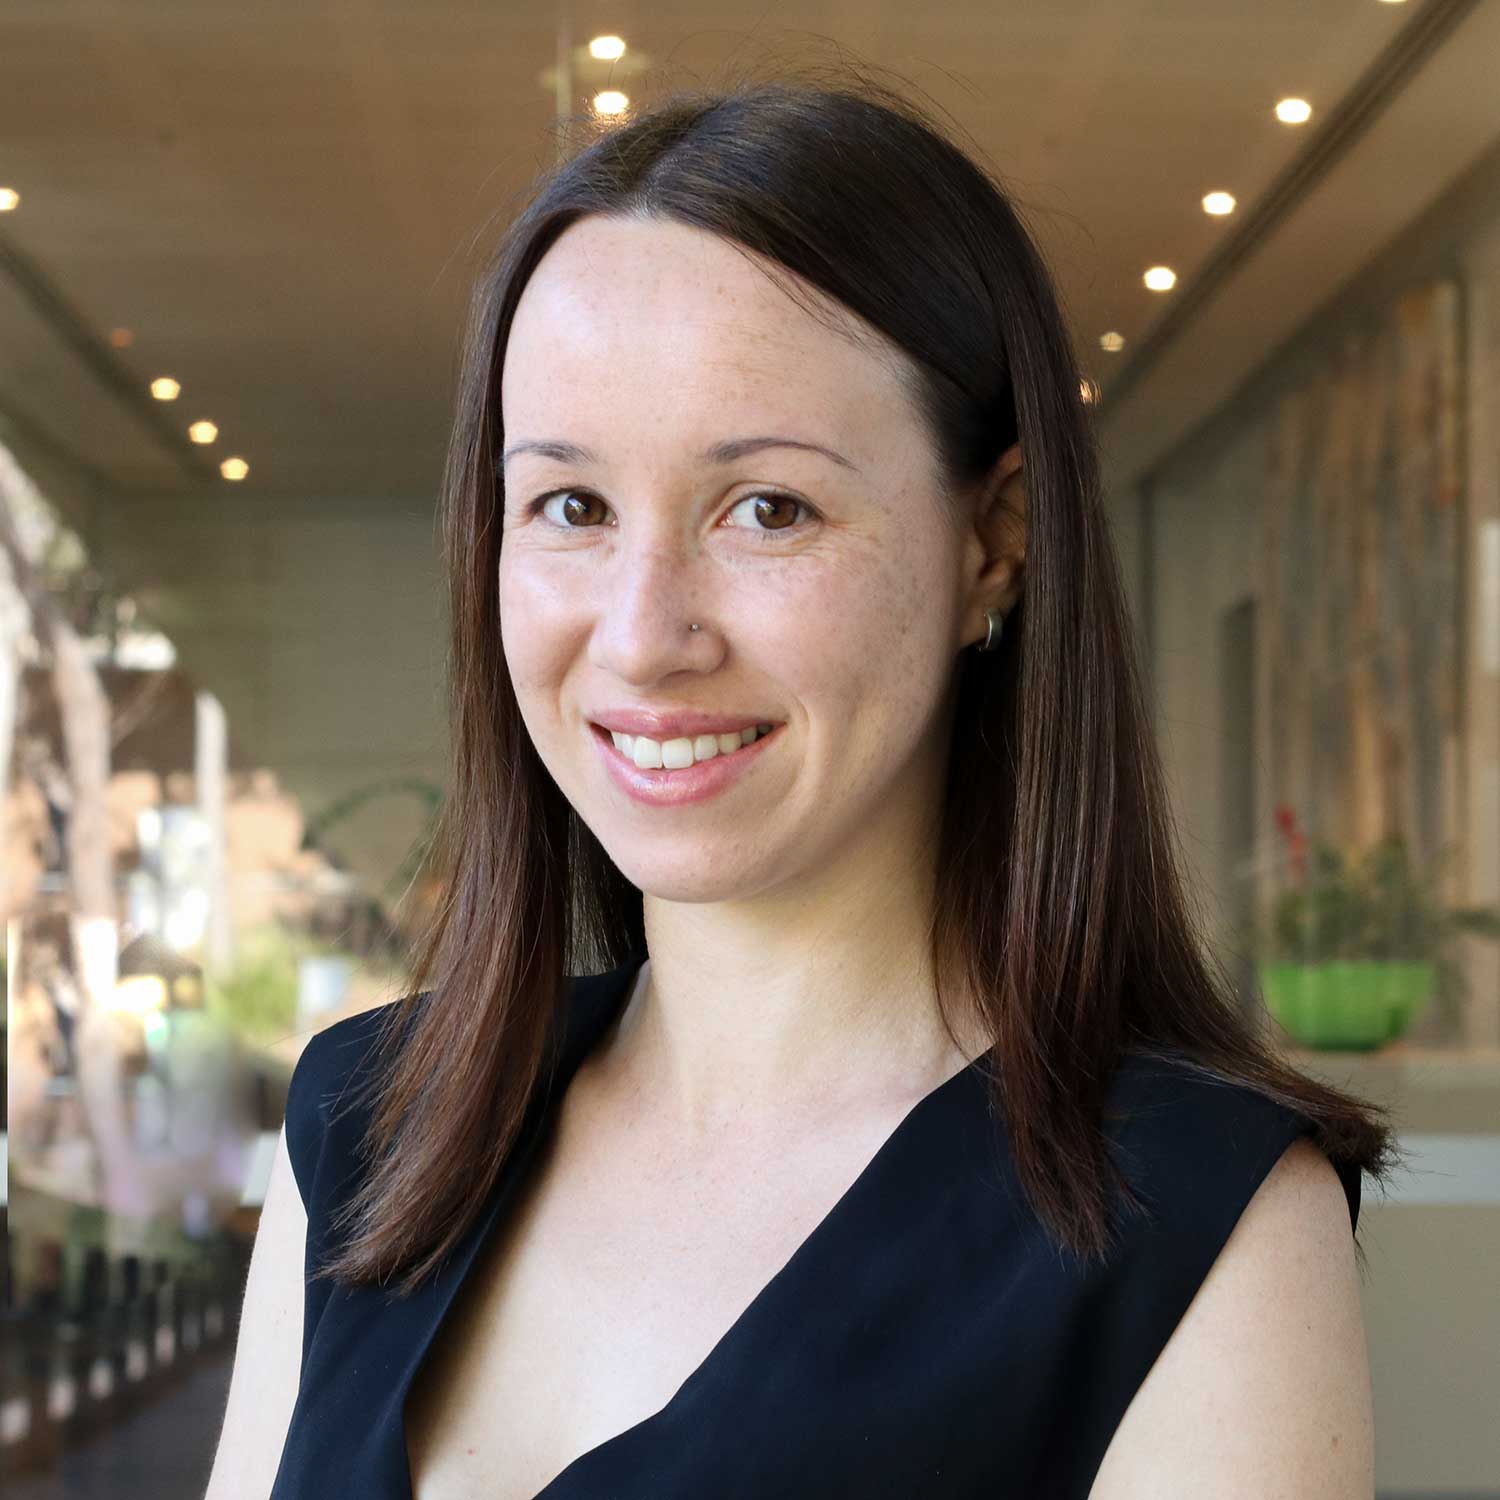 University of Newcastle early career researcher and Accredited Practising Dietitian Dr Rebecca McLoughlin  has been awarded an Asthma Australia fellowship^empty:{ds__assetid^as_asset:asset_name}